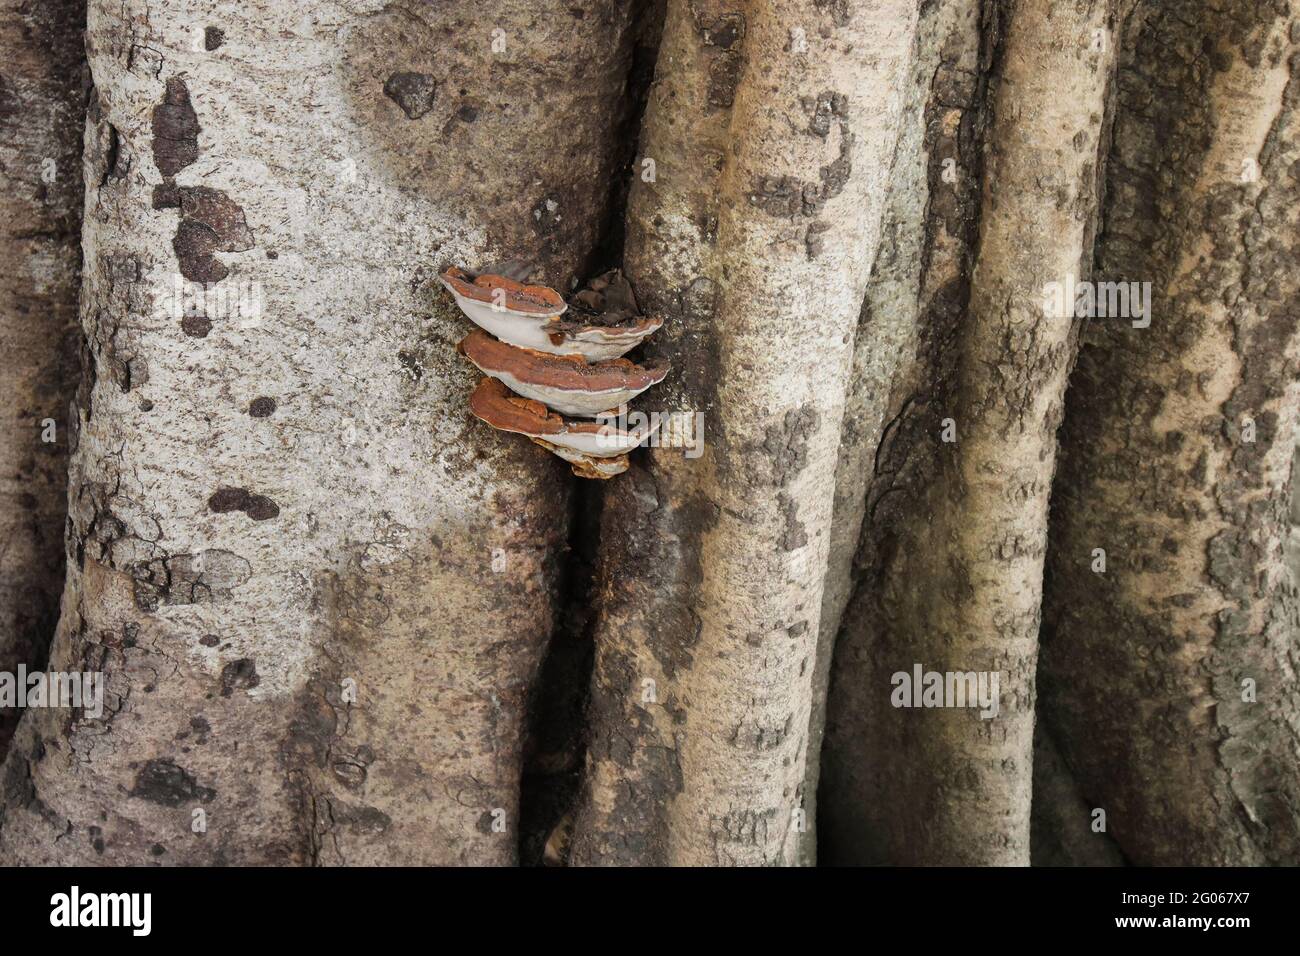 Old brown textured tree root with dead fungus in a jungle , moody image of nature. Image shot at Kolkata, Calcutta, West Bengal, India Stock Photo